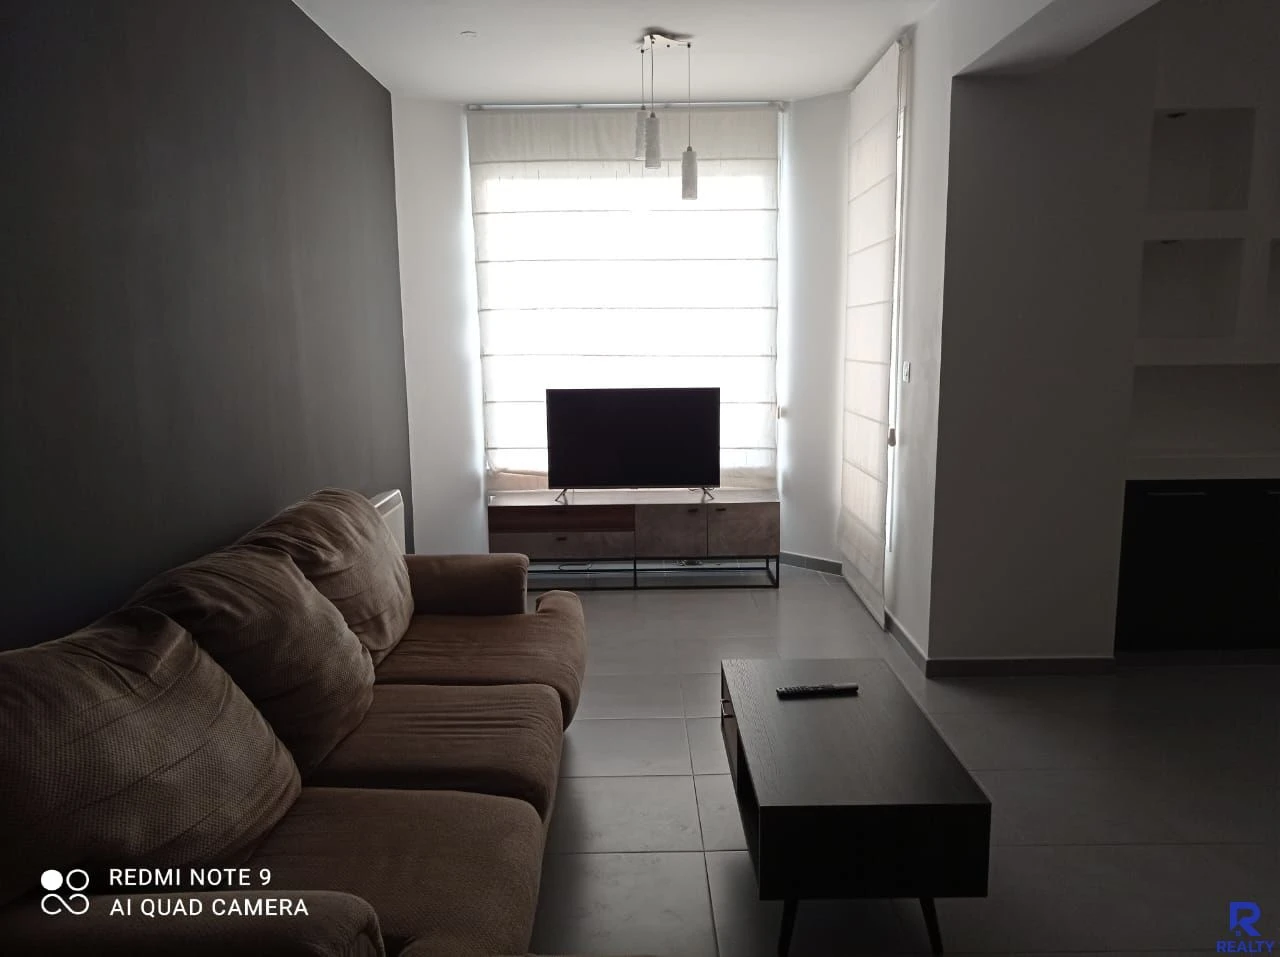 2-bedroom penthouse to rent, image 1